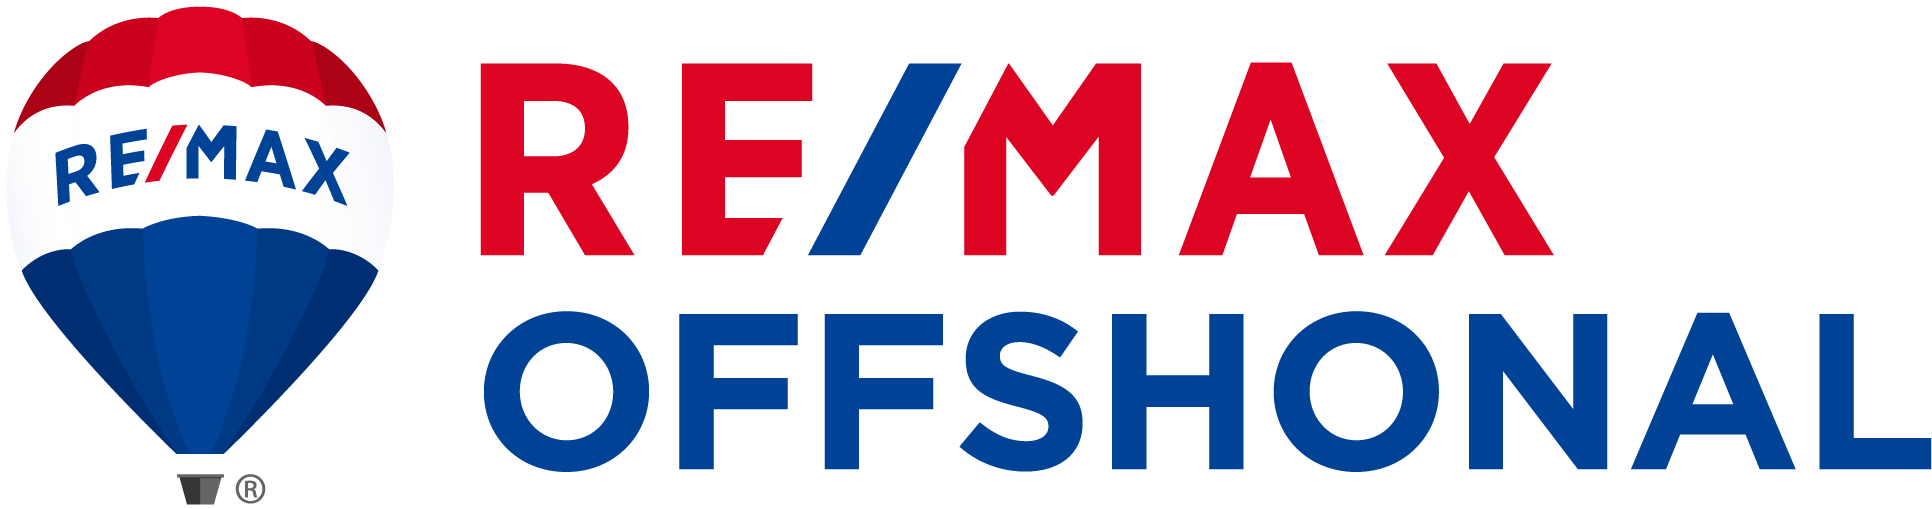 REMAX OFFSHONAL